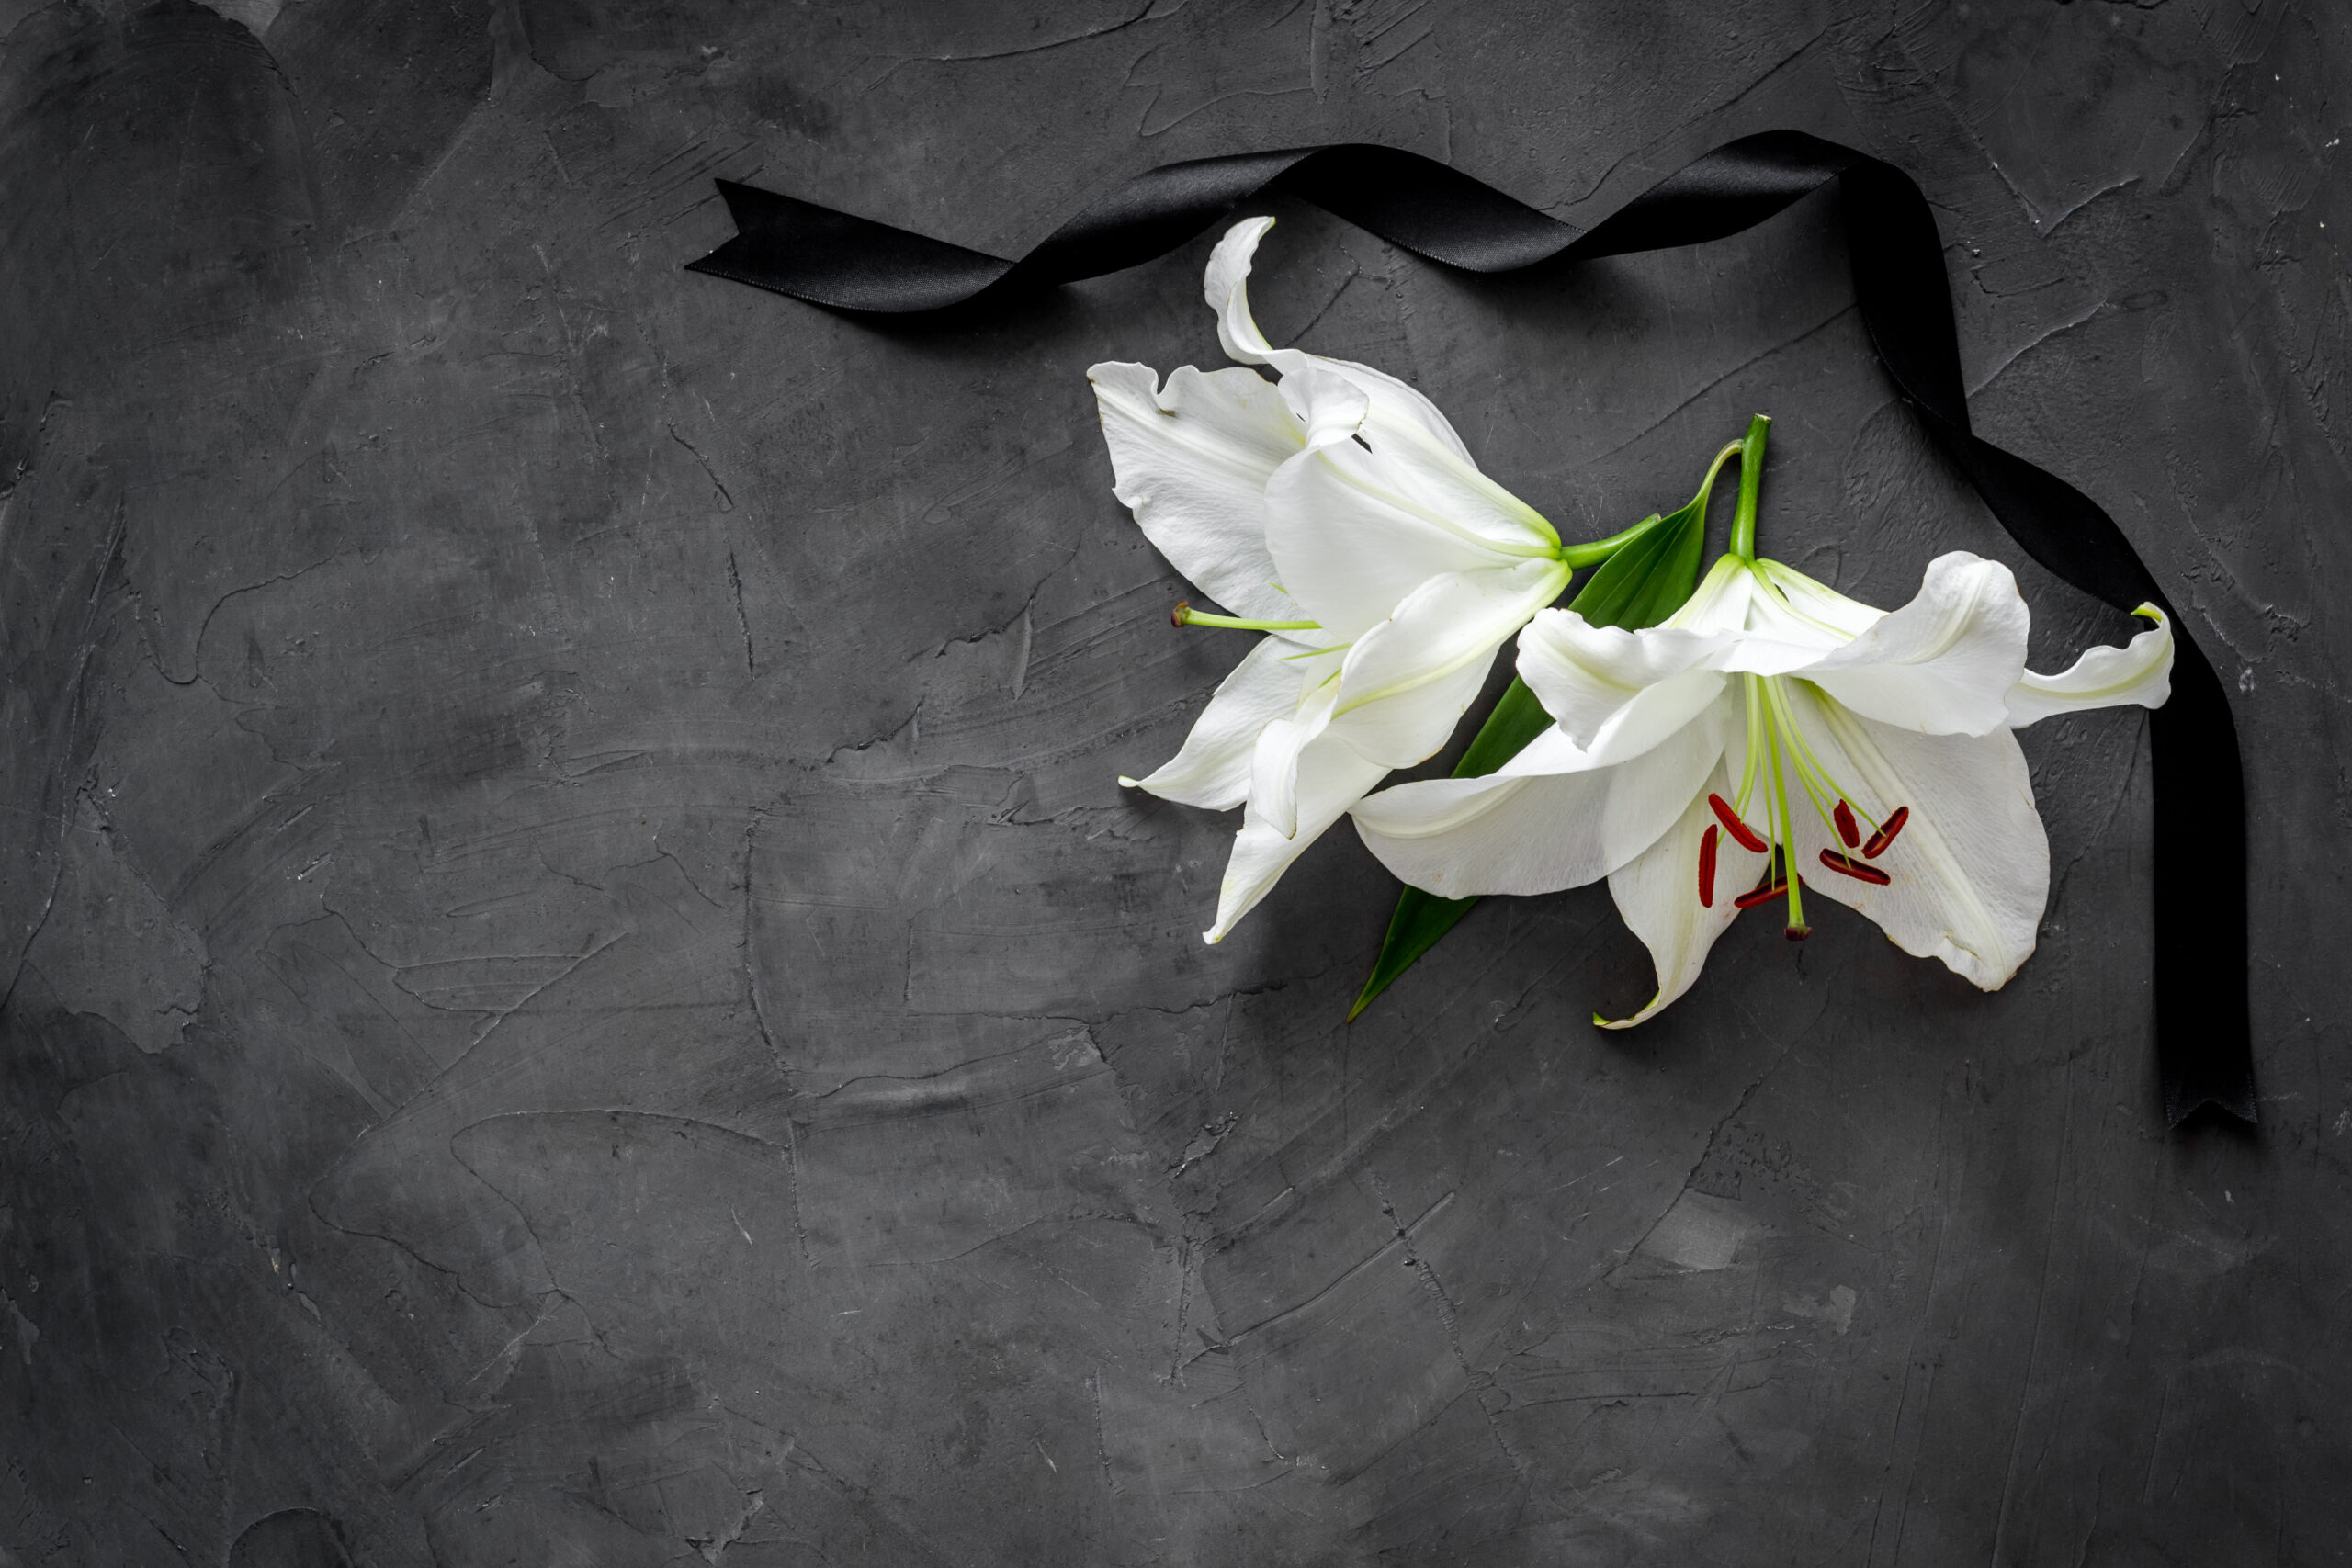 Lily funeral flower on dark stone. Condolence card with copy space.